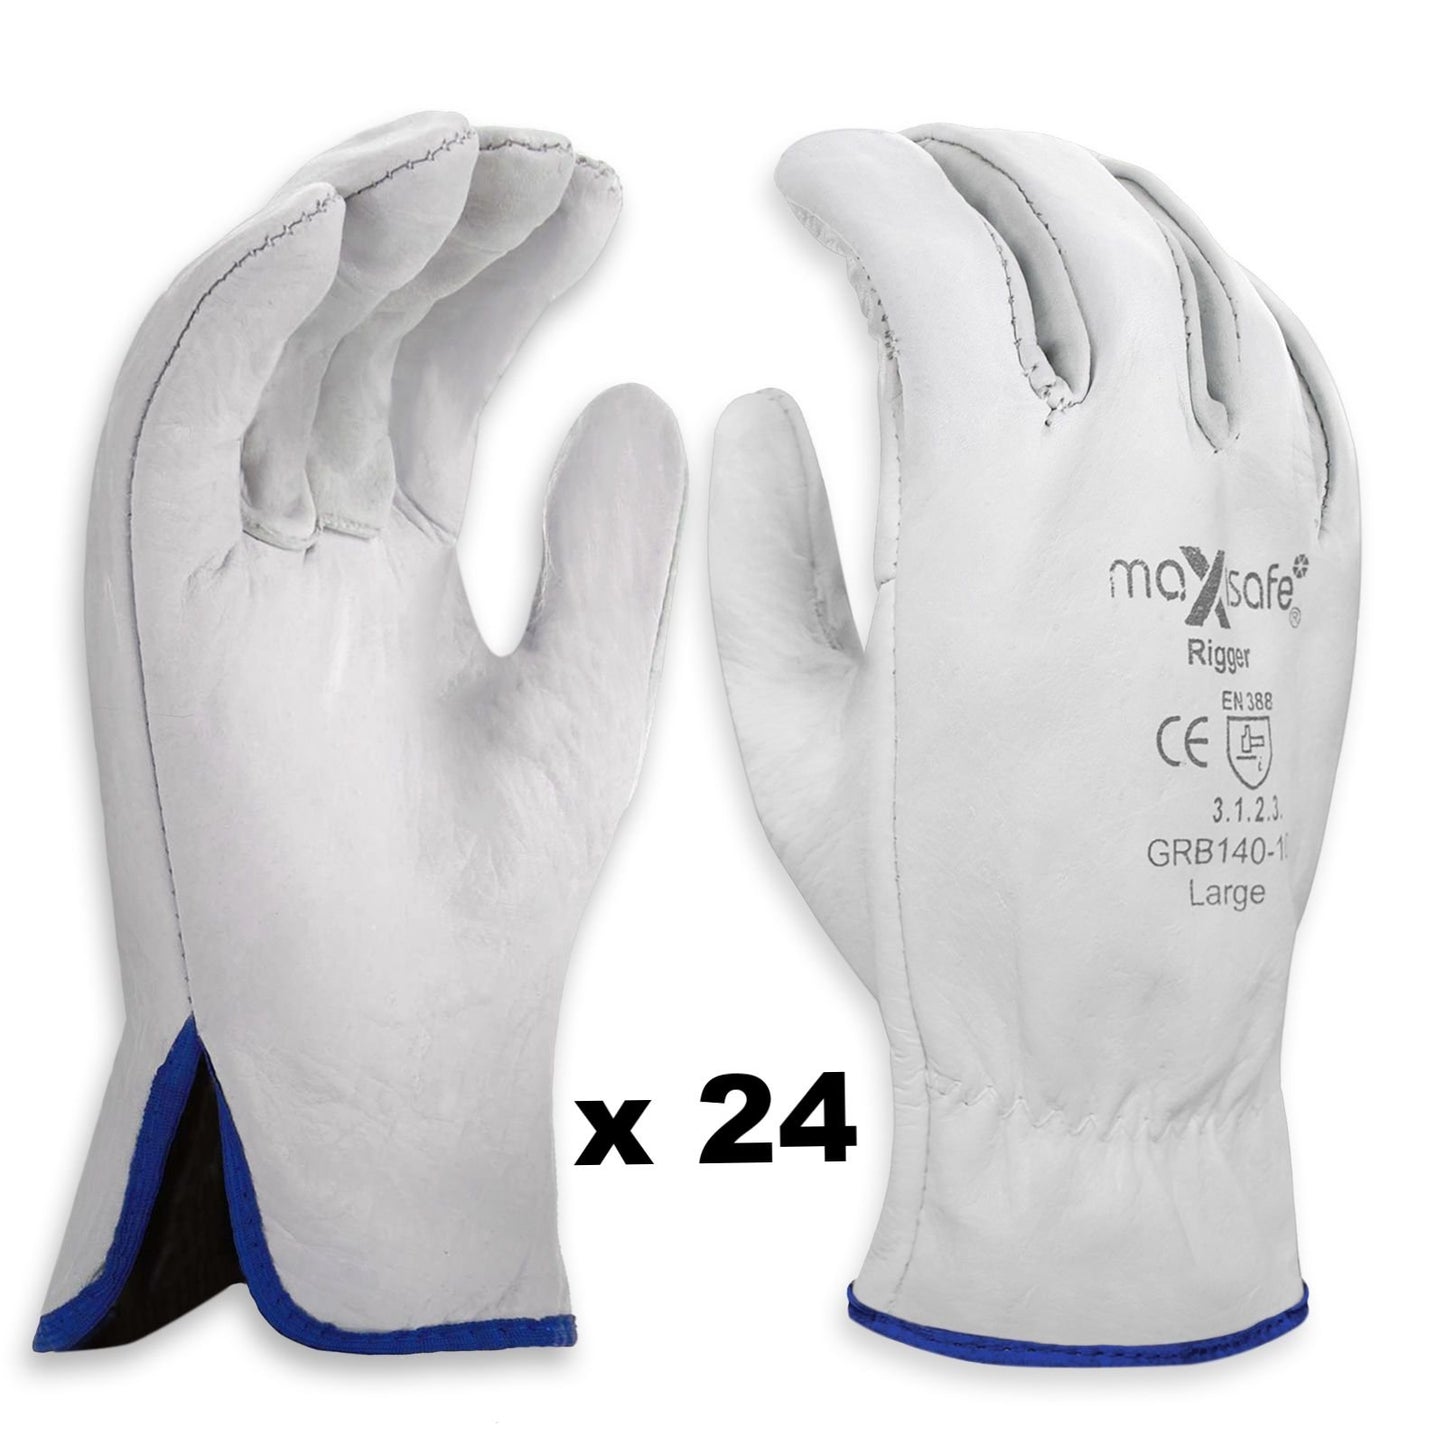 General Purpose Maxisafe Riggers Gloves Premium Cow Grain Leather Soft White